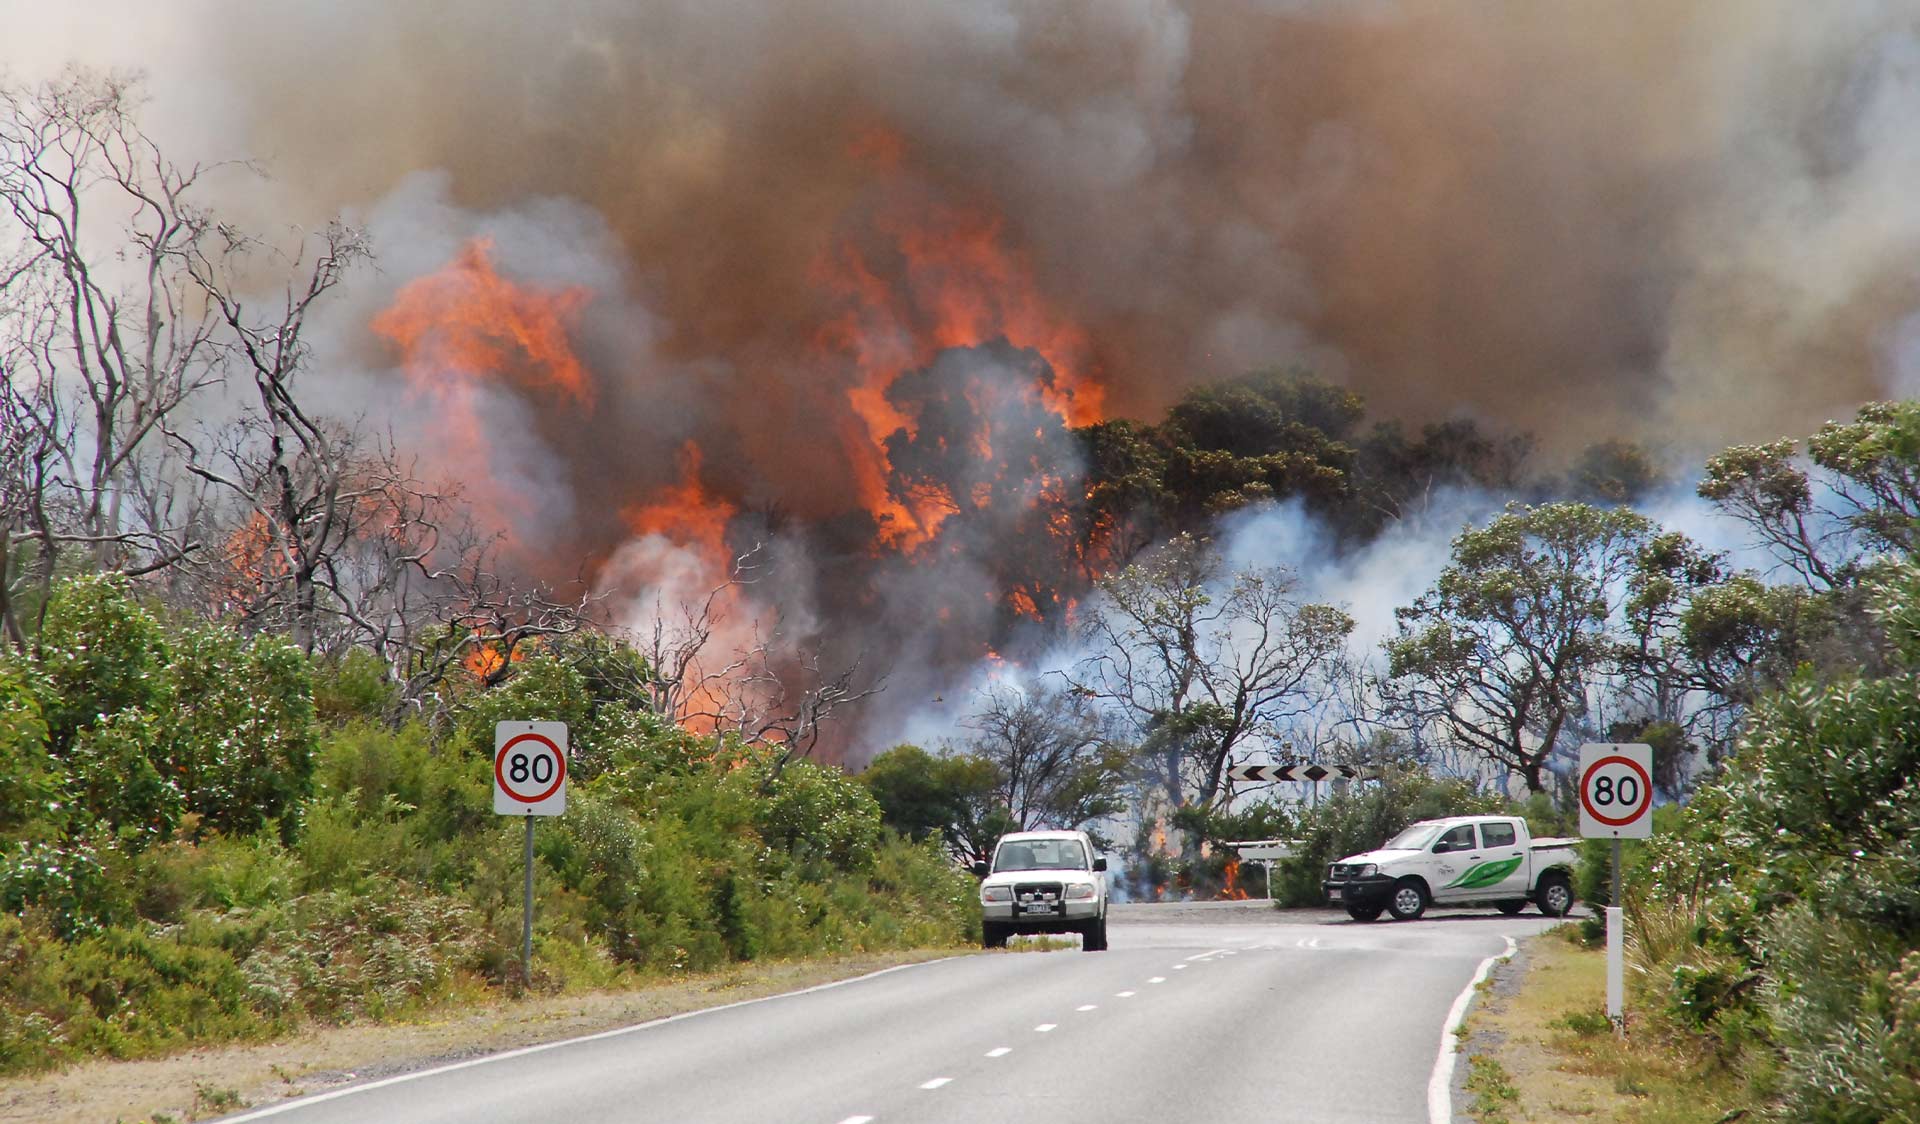 Road signs and two vehicles on the road in the foreground, while flames and smoke are visible behind the trees in the background